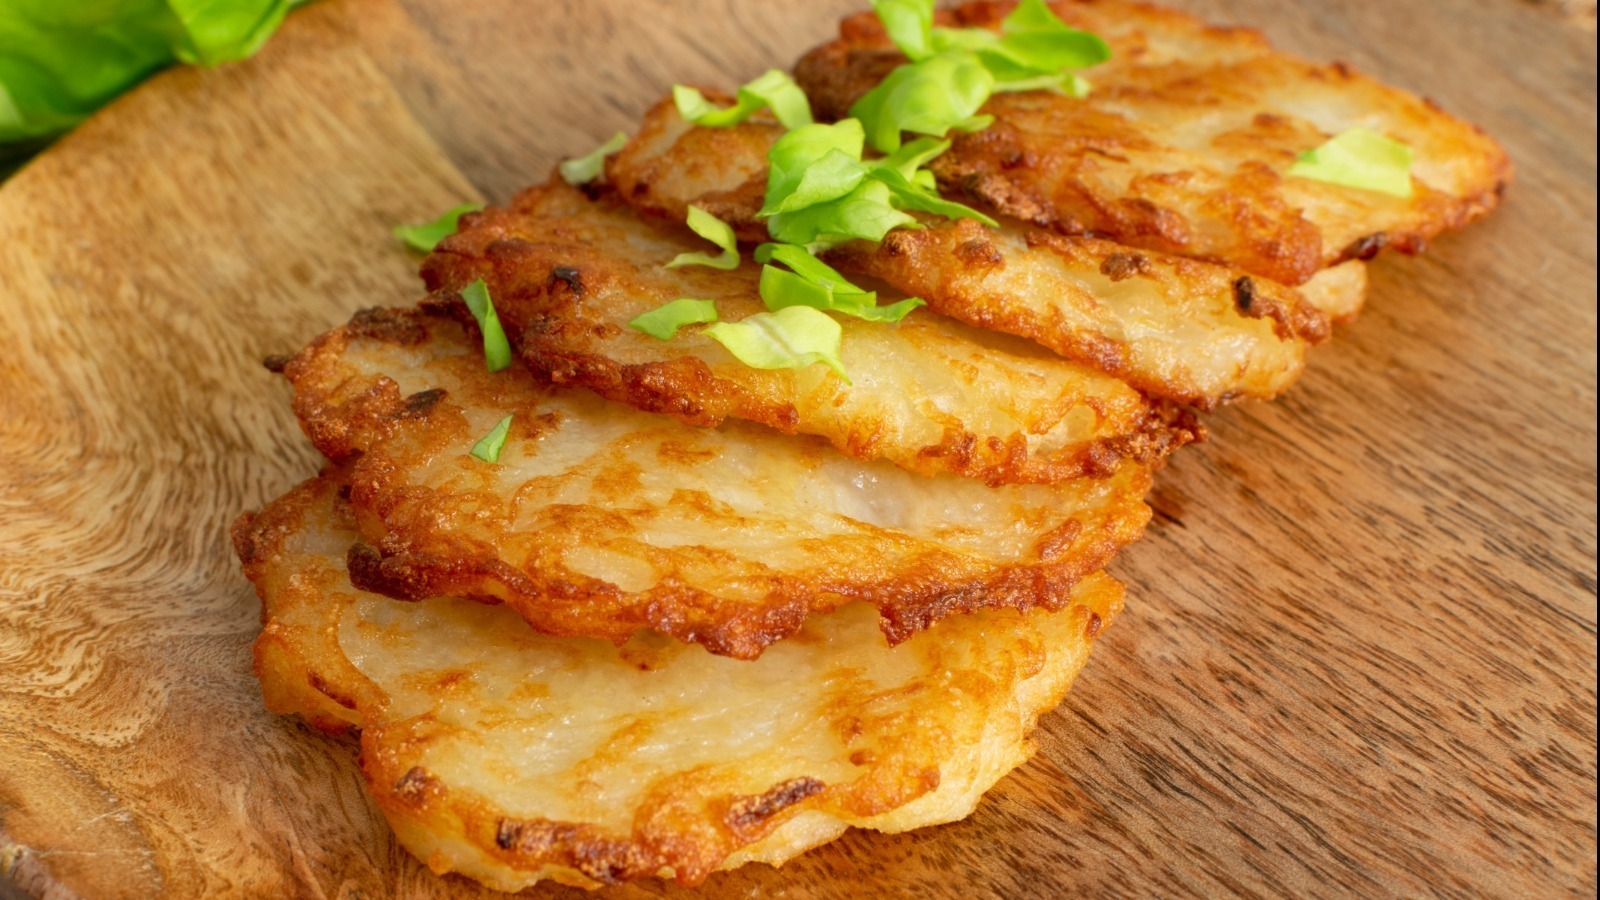 What is the difference between a latke and a hash brown?